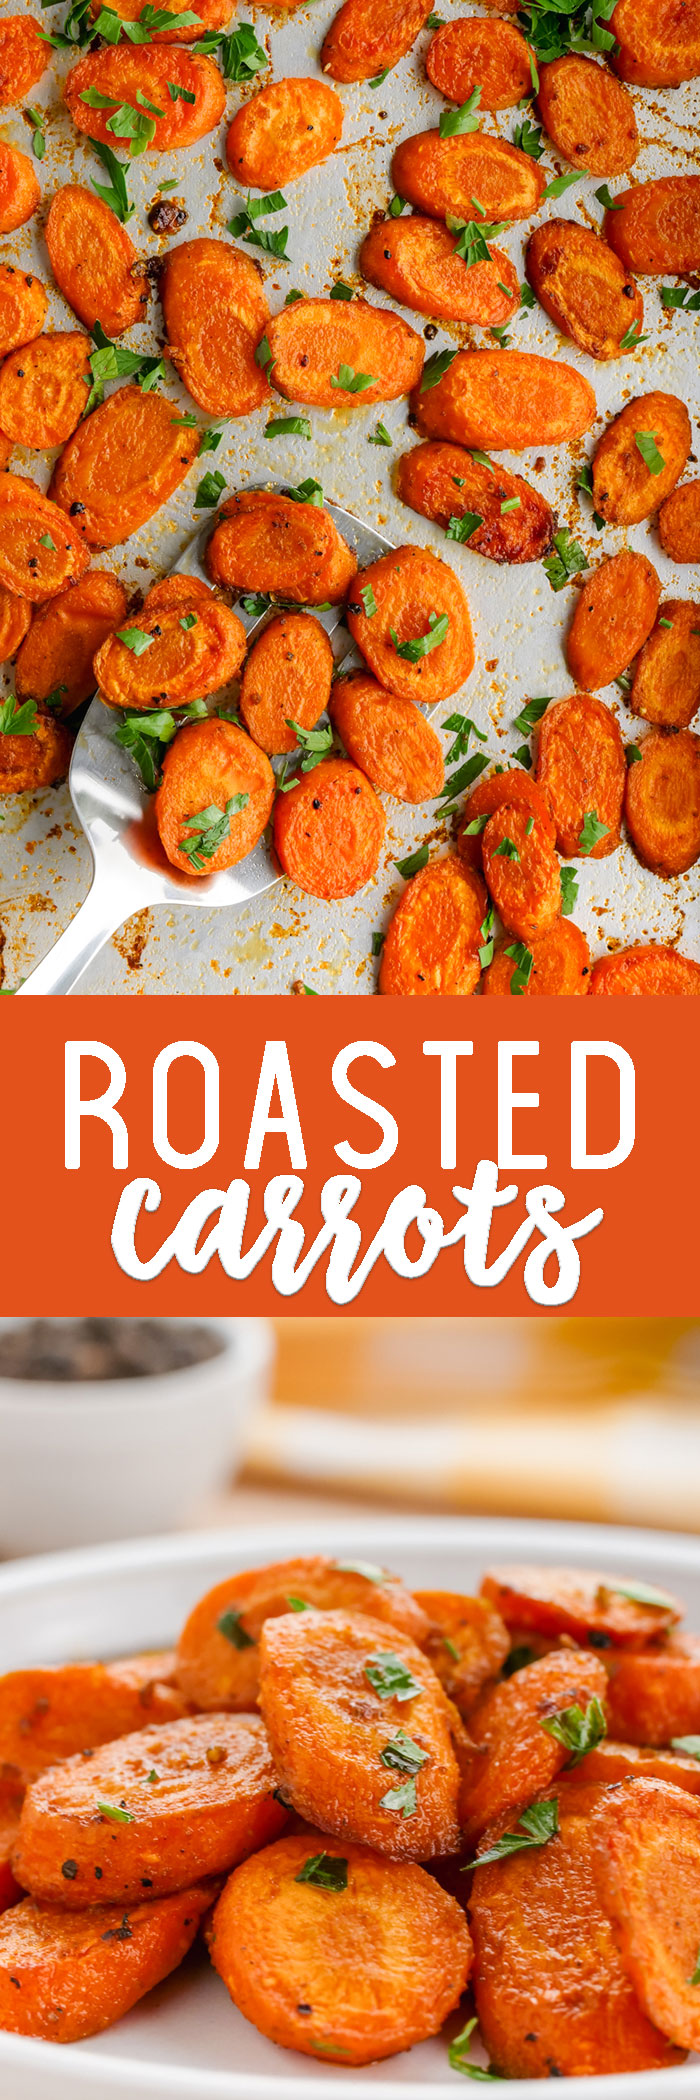 Roasted Carrots - Easy Peasy Meals